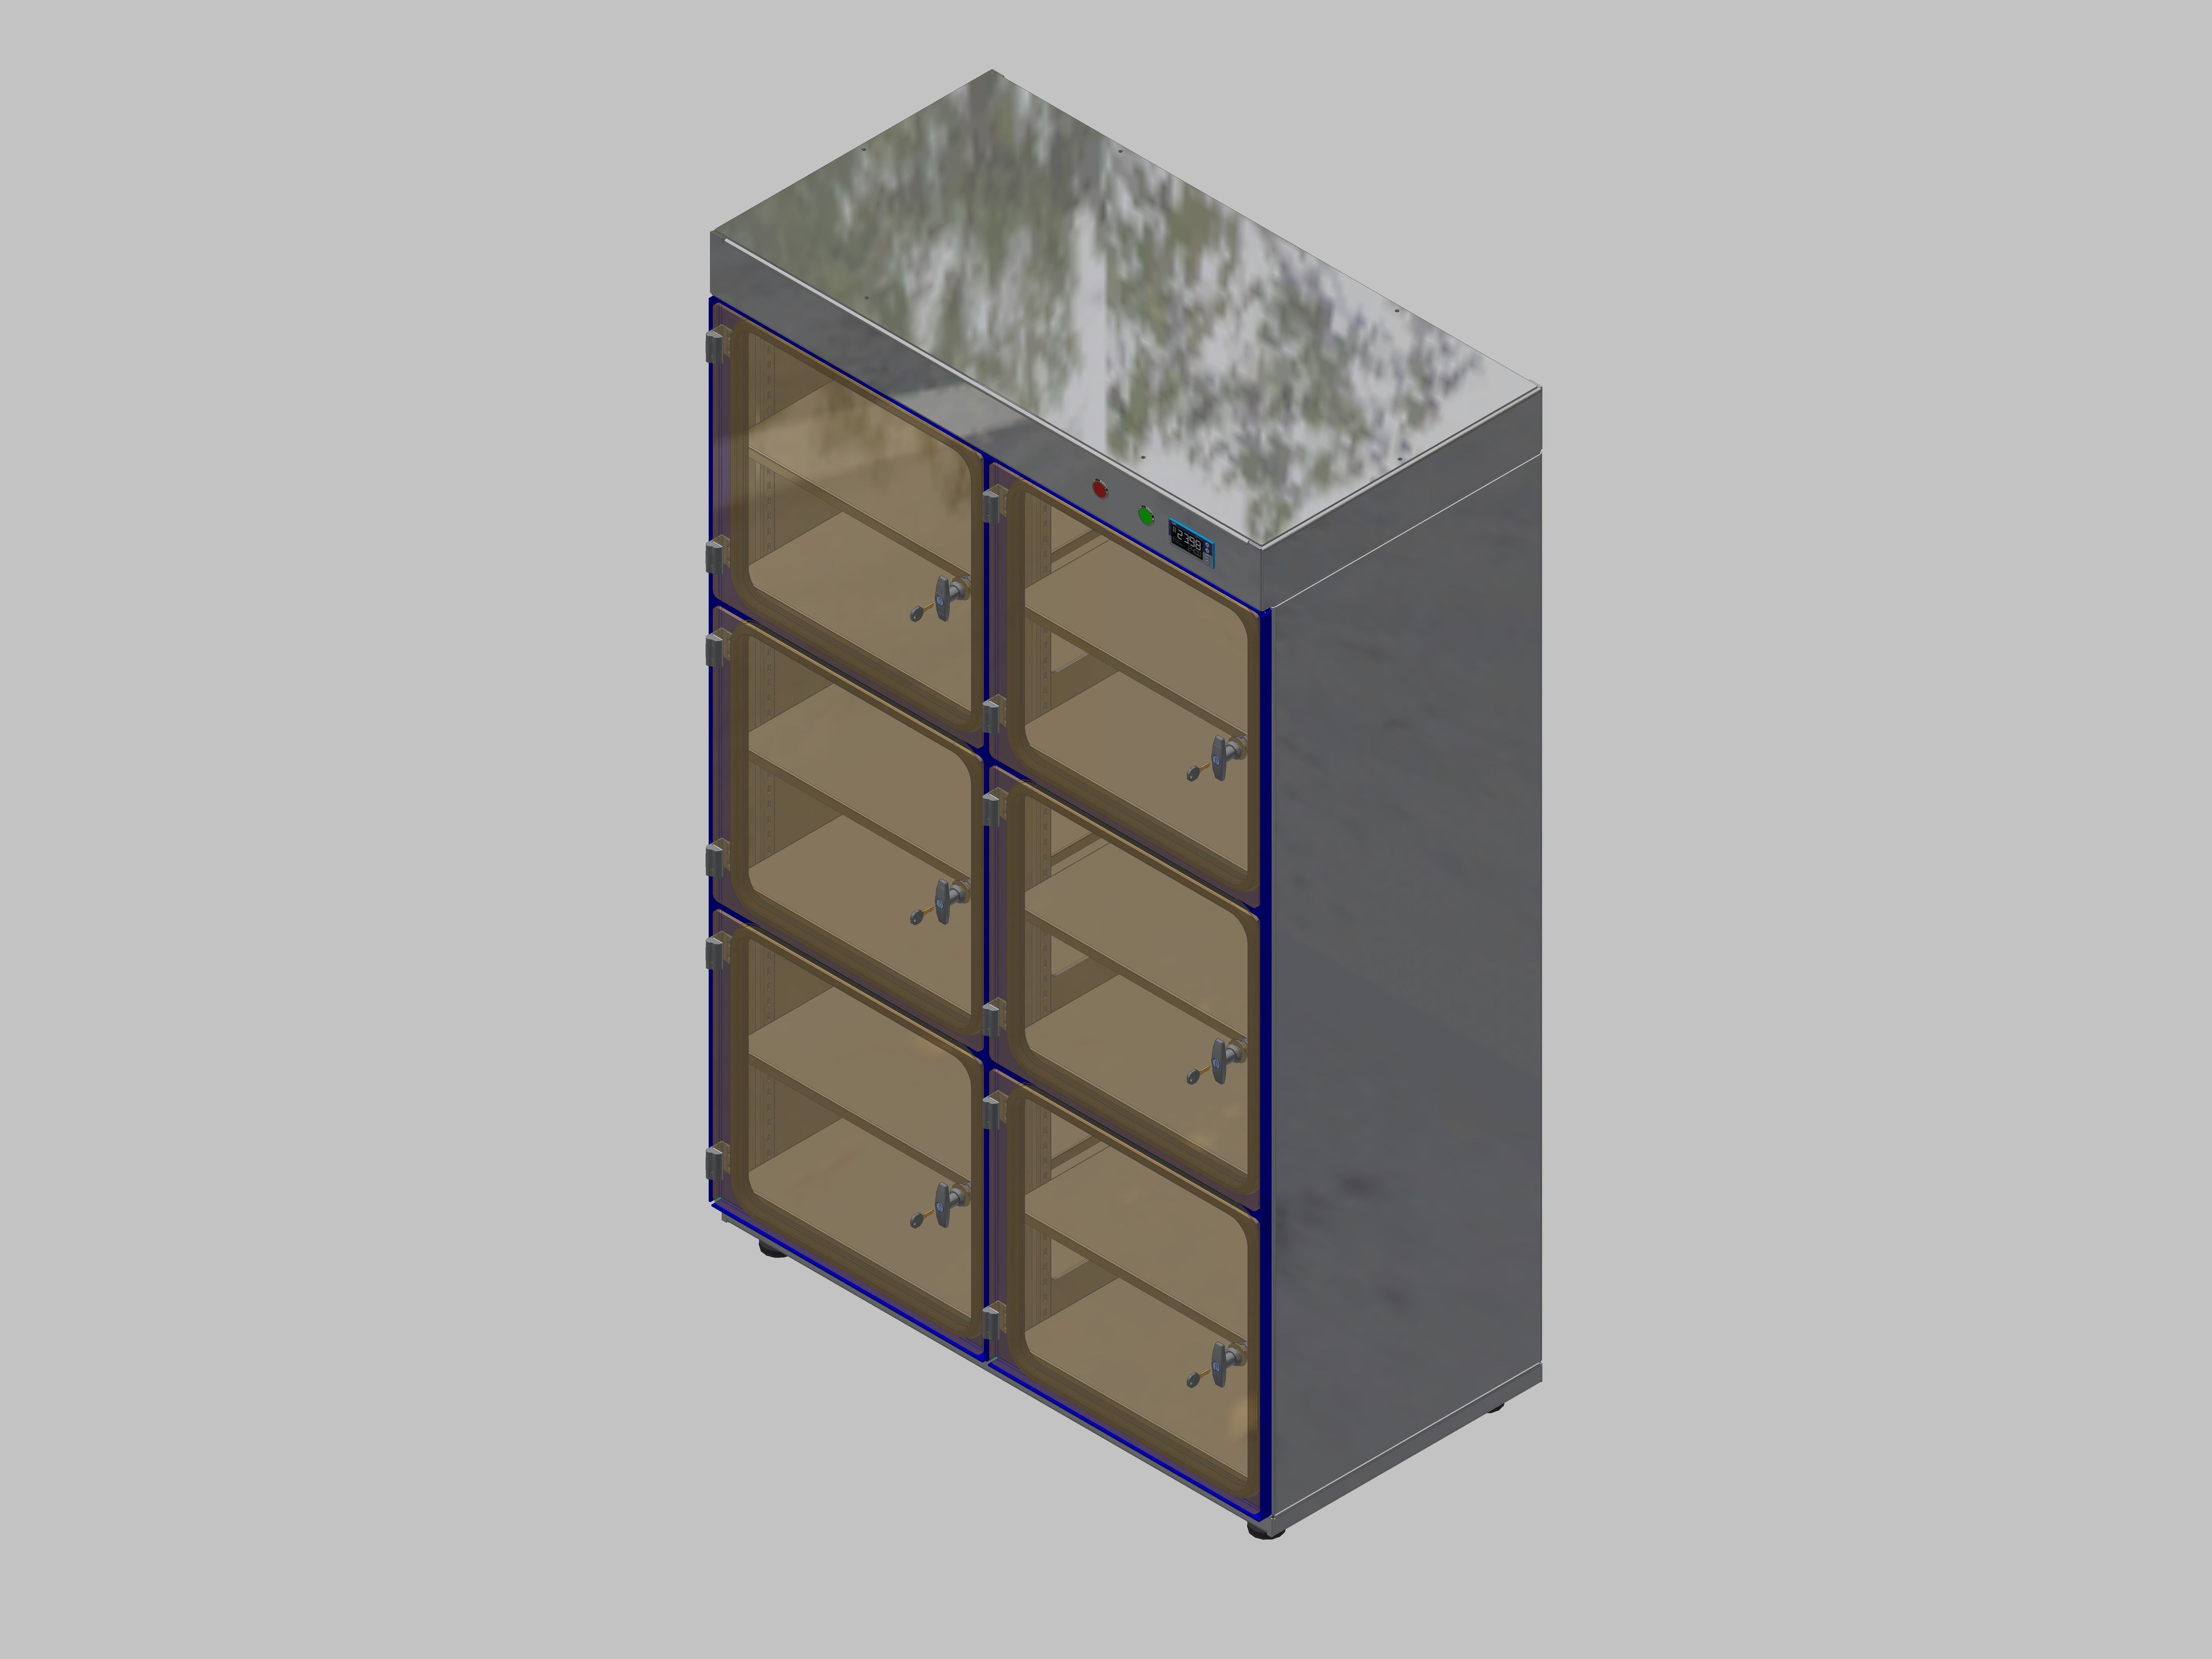 Dry storage cabinet-ITN-1200-6 with 2 shelves per compartment and base design with adjustable feet